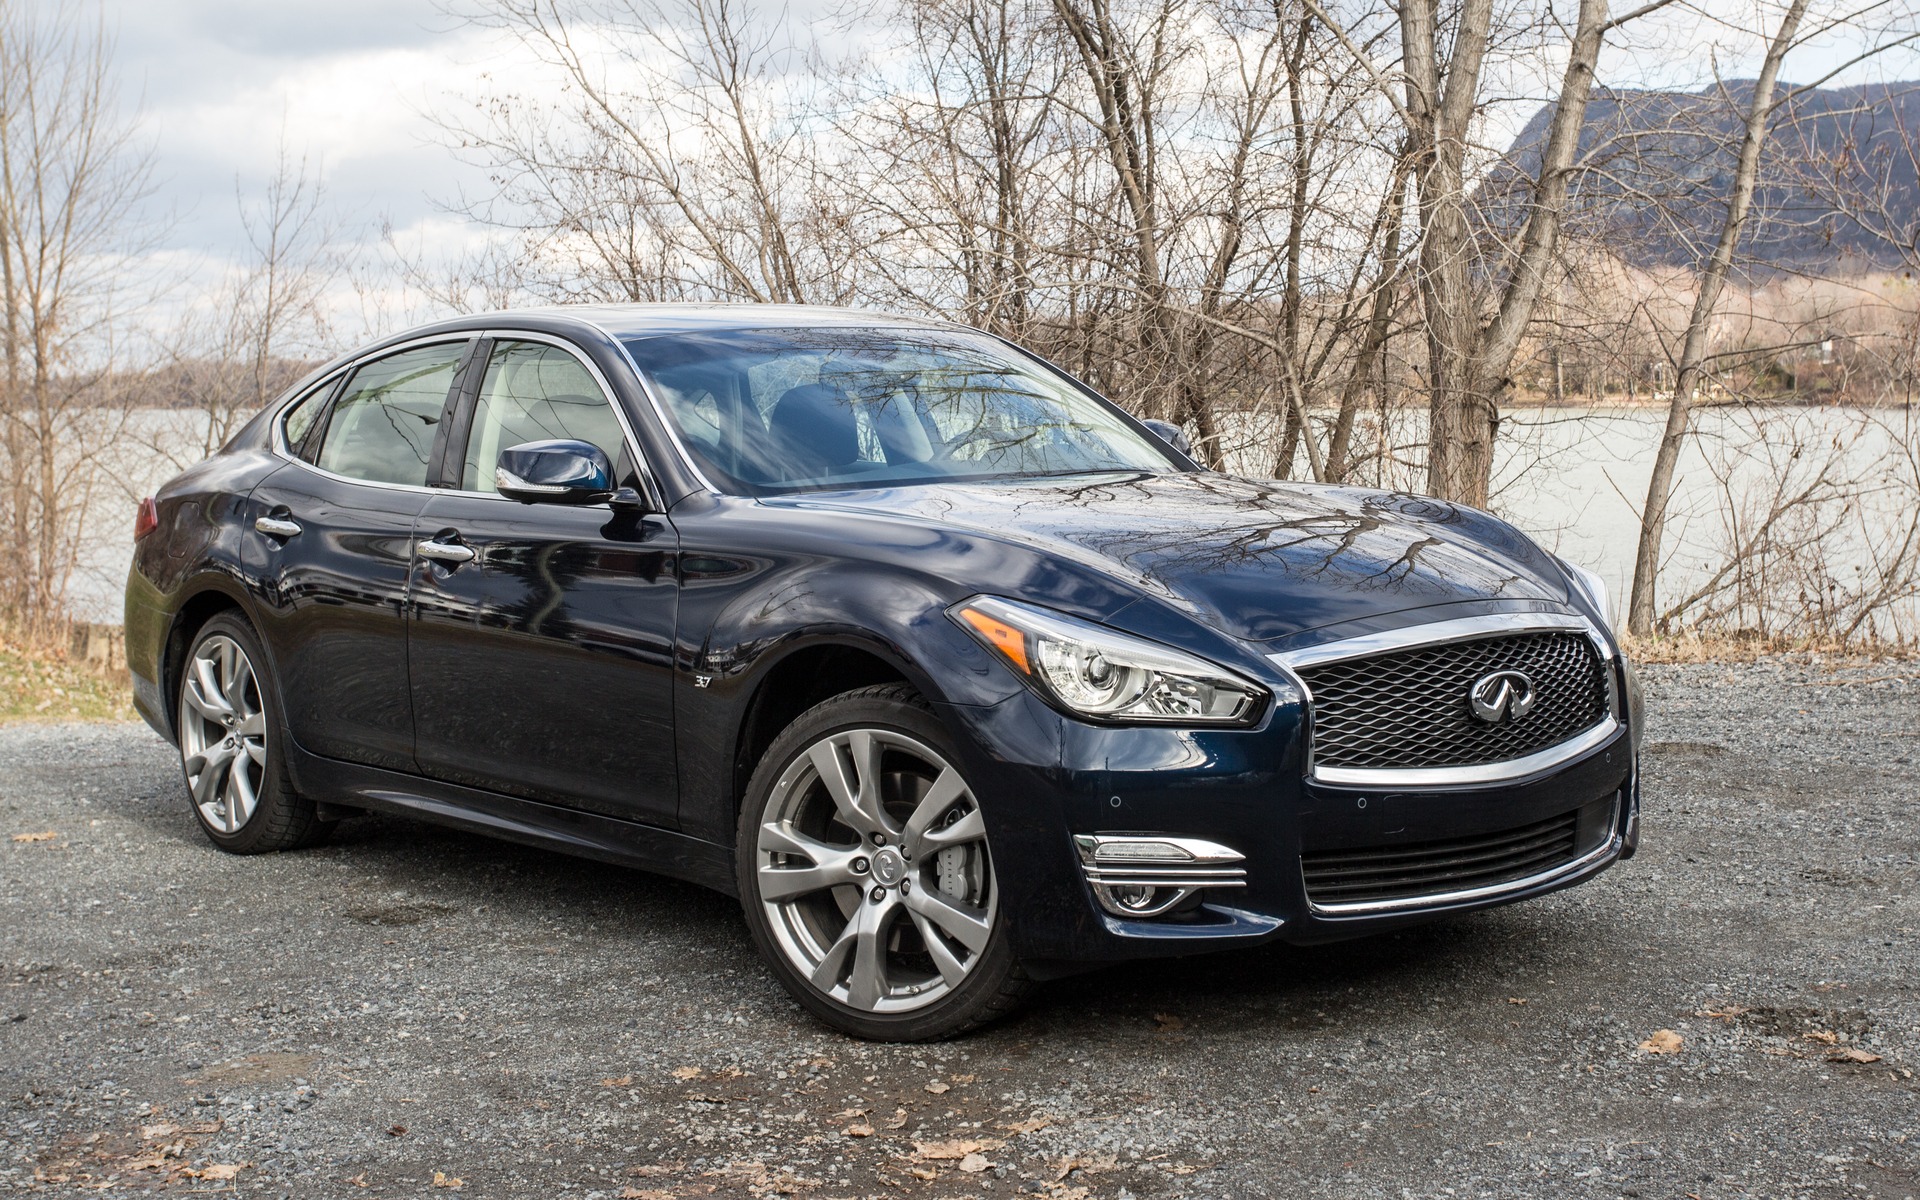 The 2015 Infiniti Q70: Overshadowed Luxury - The Car Guide